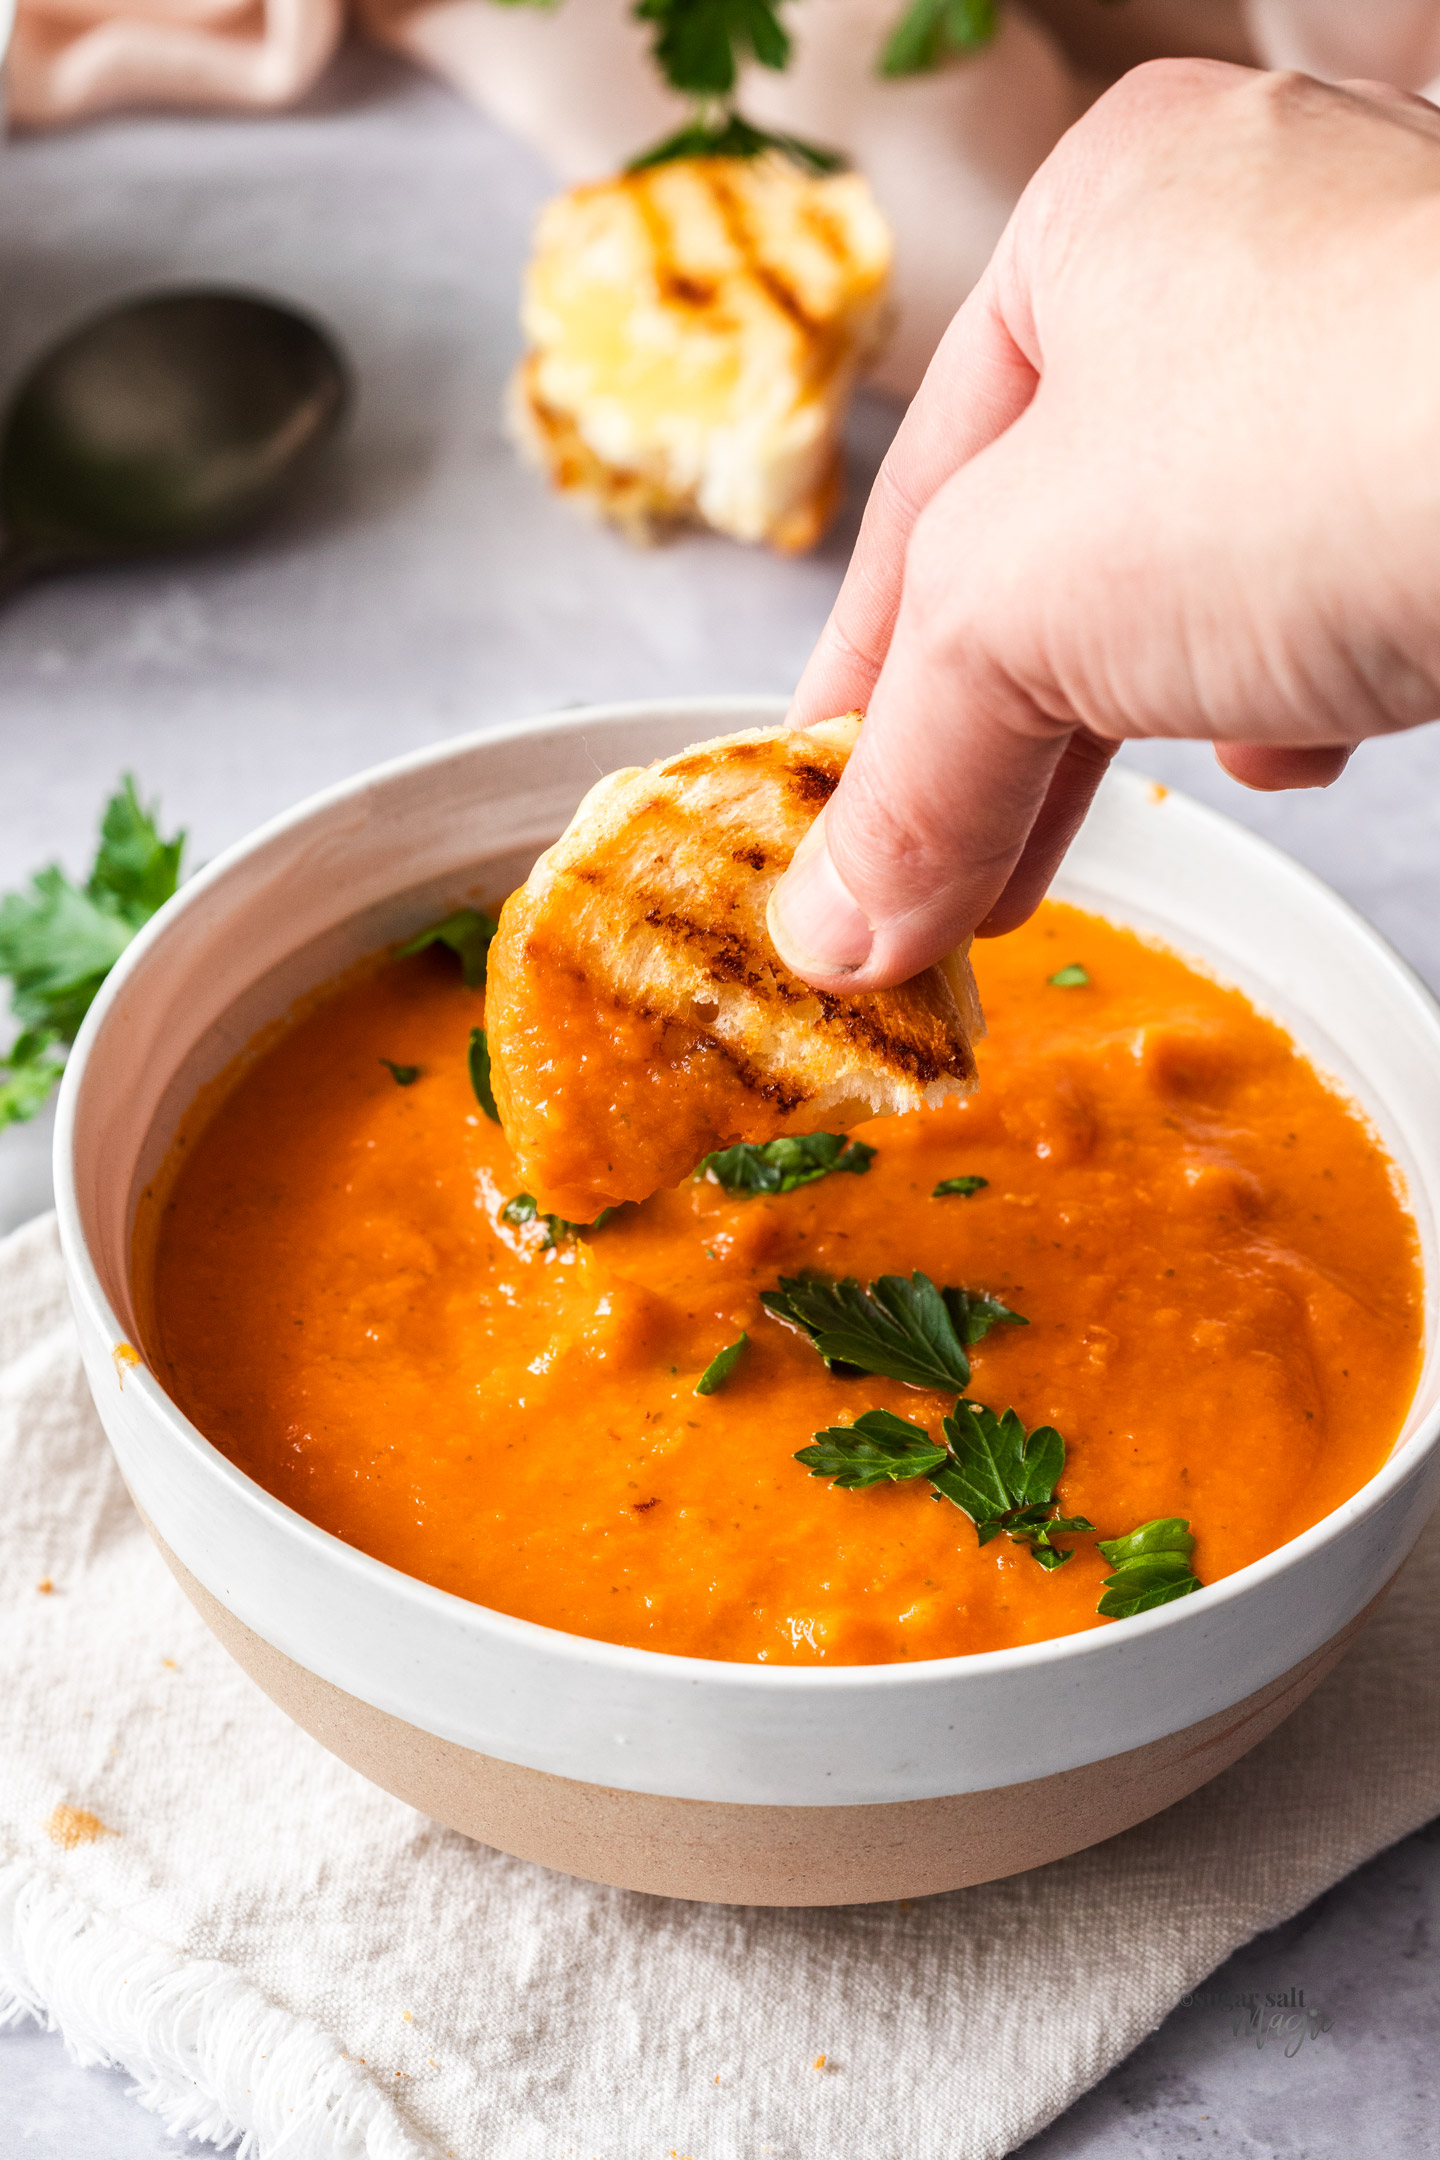 A mini grilled cheese being dipped into a bowl of tomato soup.